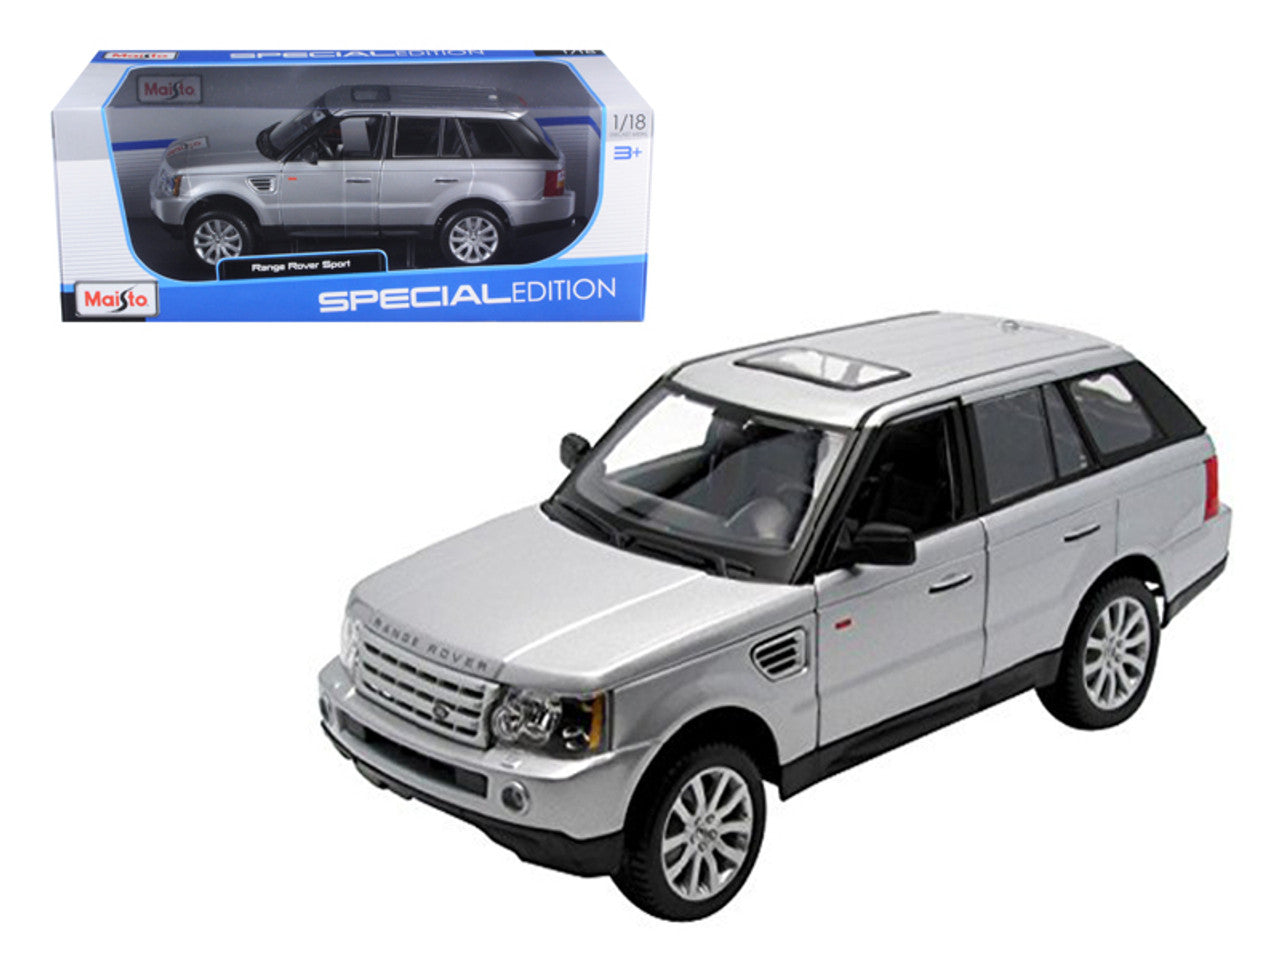 1/18 Diecast Land Rover Range Rover Sport Silver Scale Model car by Maisto